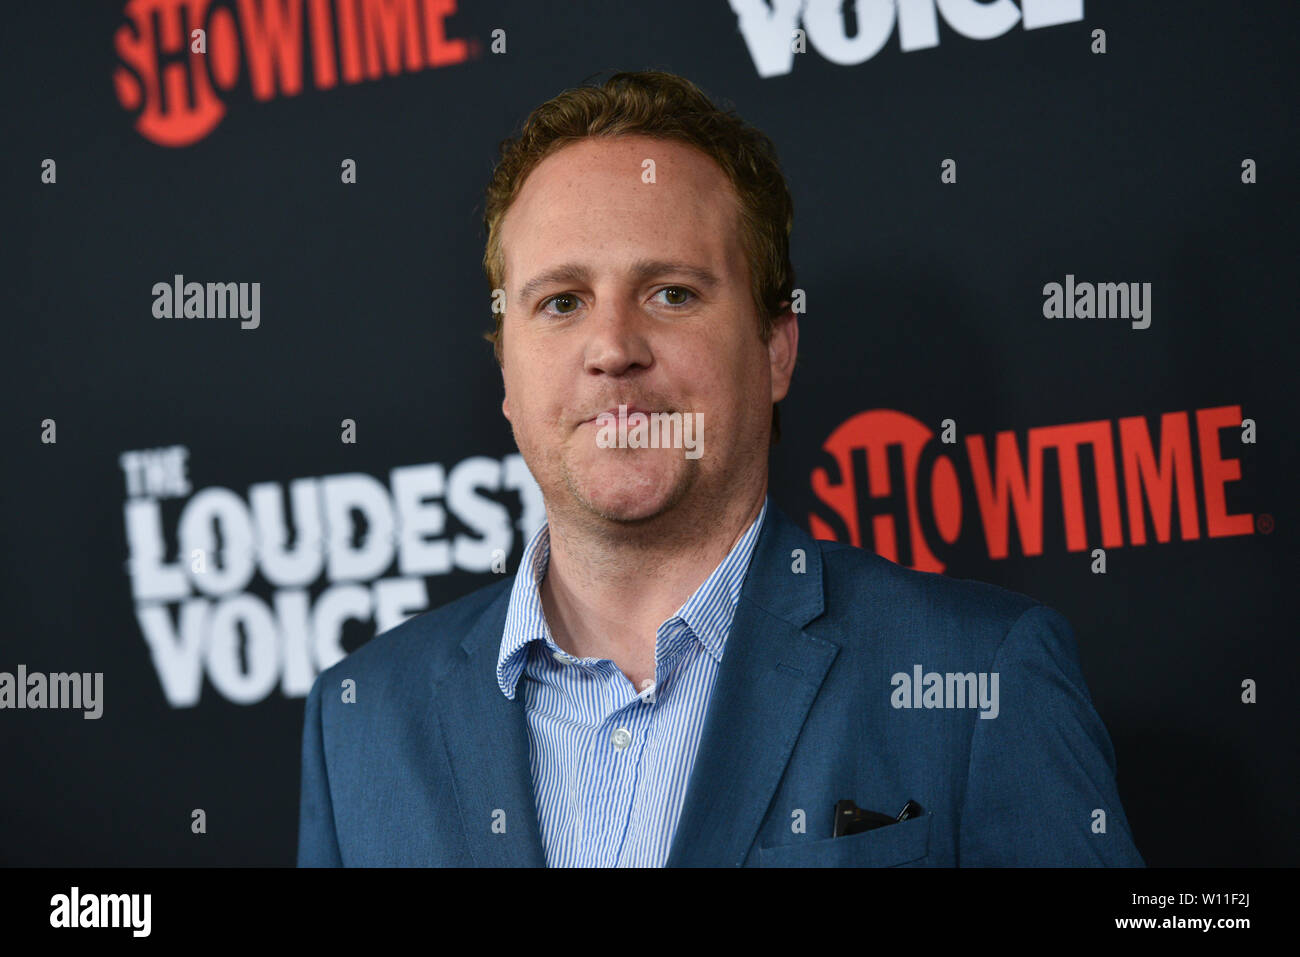 Patch Darragh attends 'The Loudest Voice' New York Premiere at Paris Theatre on June 24, 2019 in New York City. Stock Photo